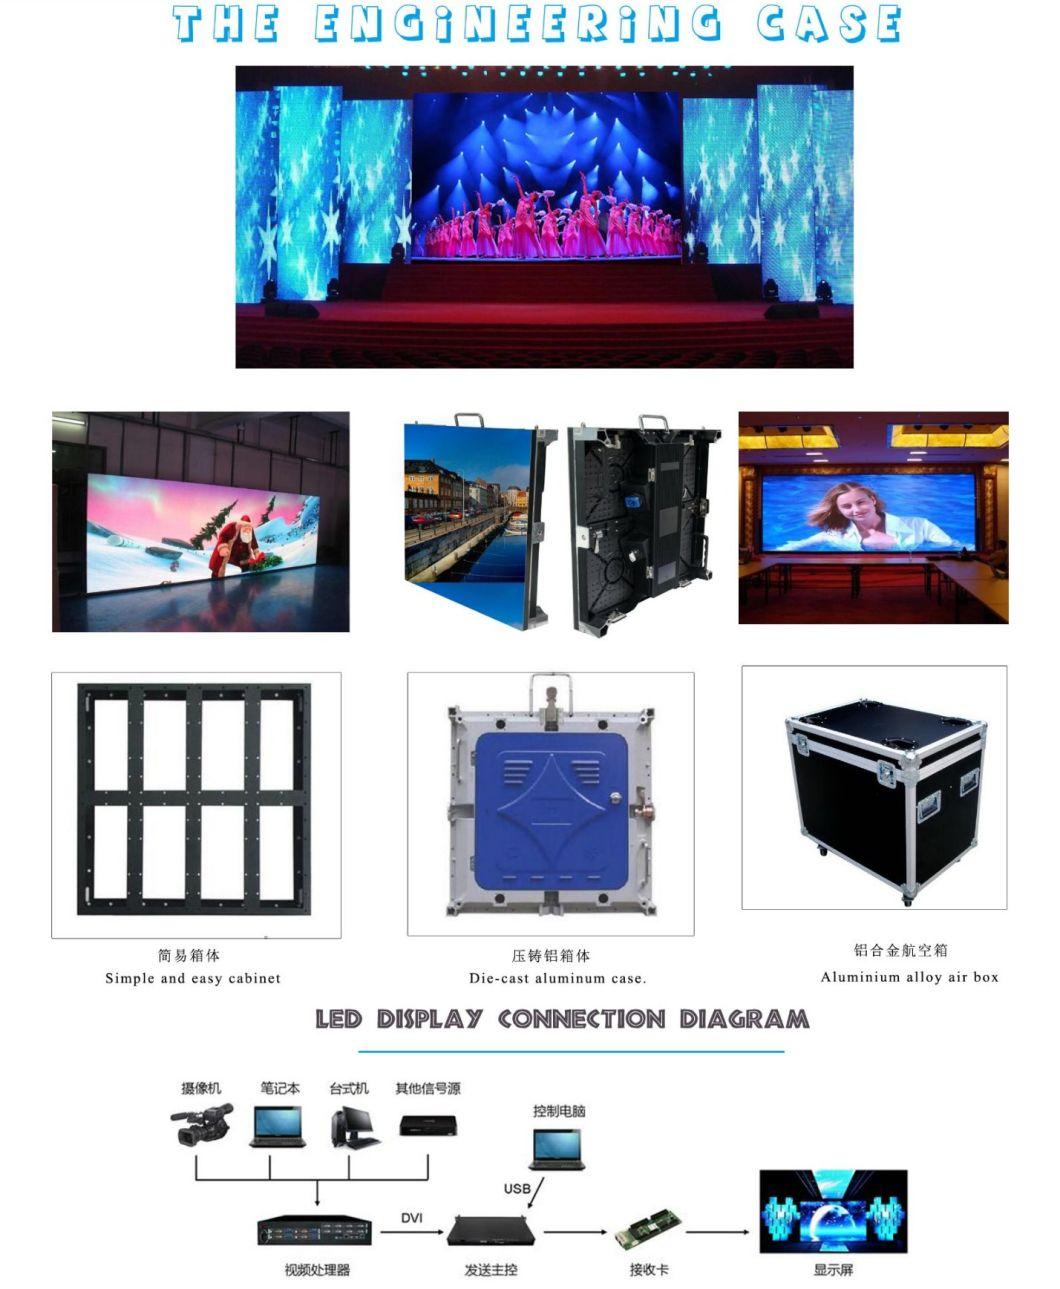 P10 Outdoor LED Screen Far View Distance Full Color Billboard Signs